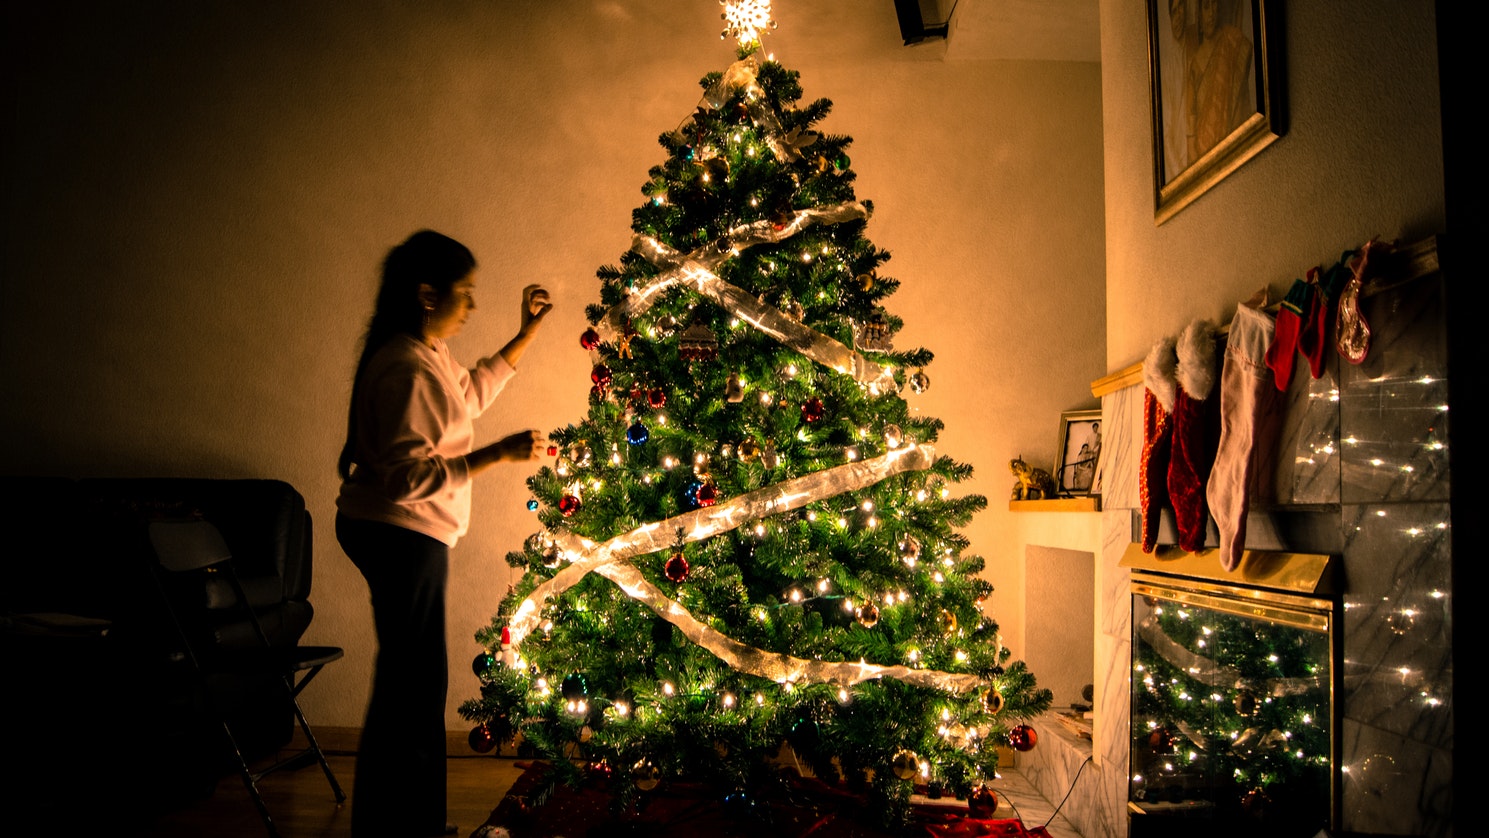 The Christmas Niche Blueprint: A Step-by-Step Guide for the Holidays